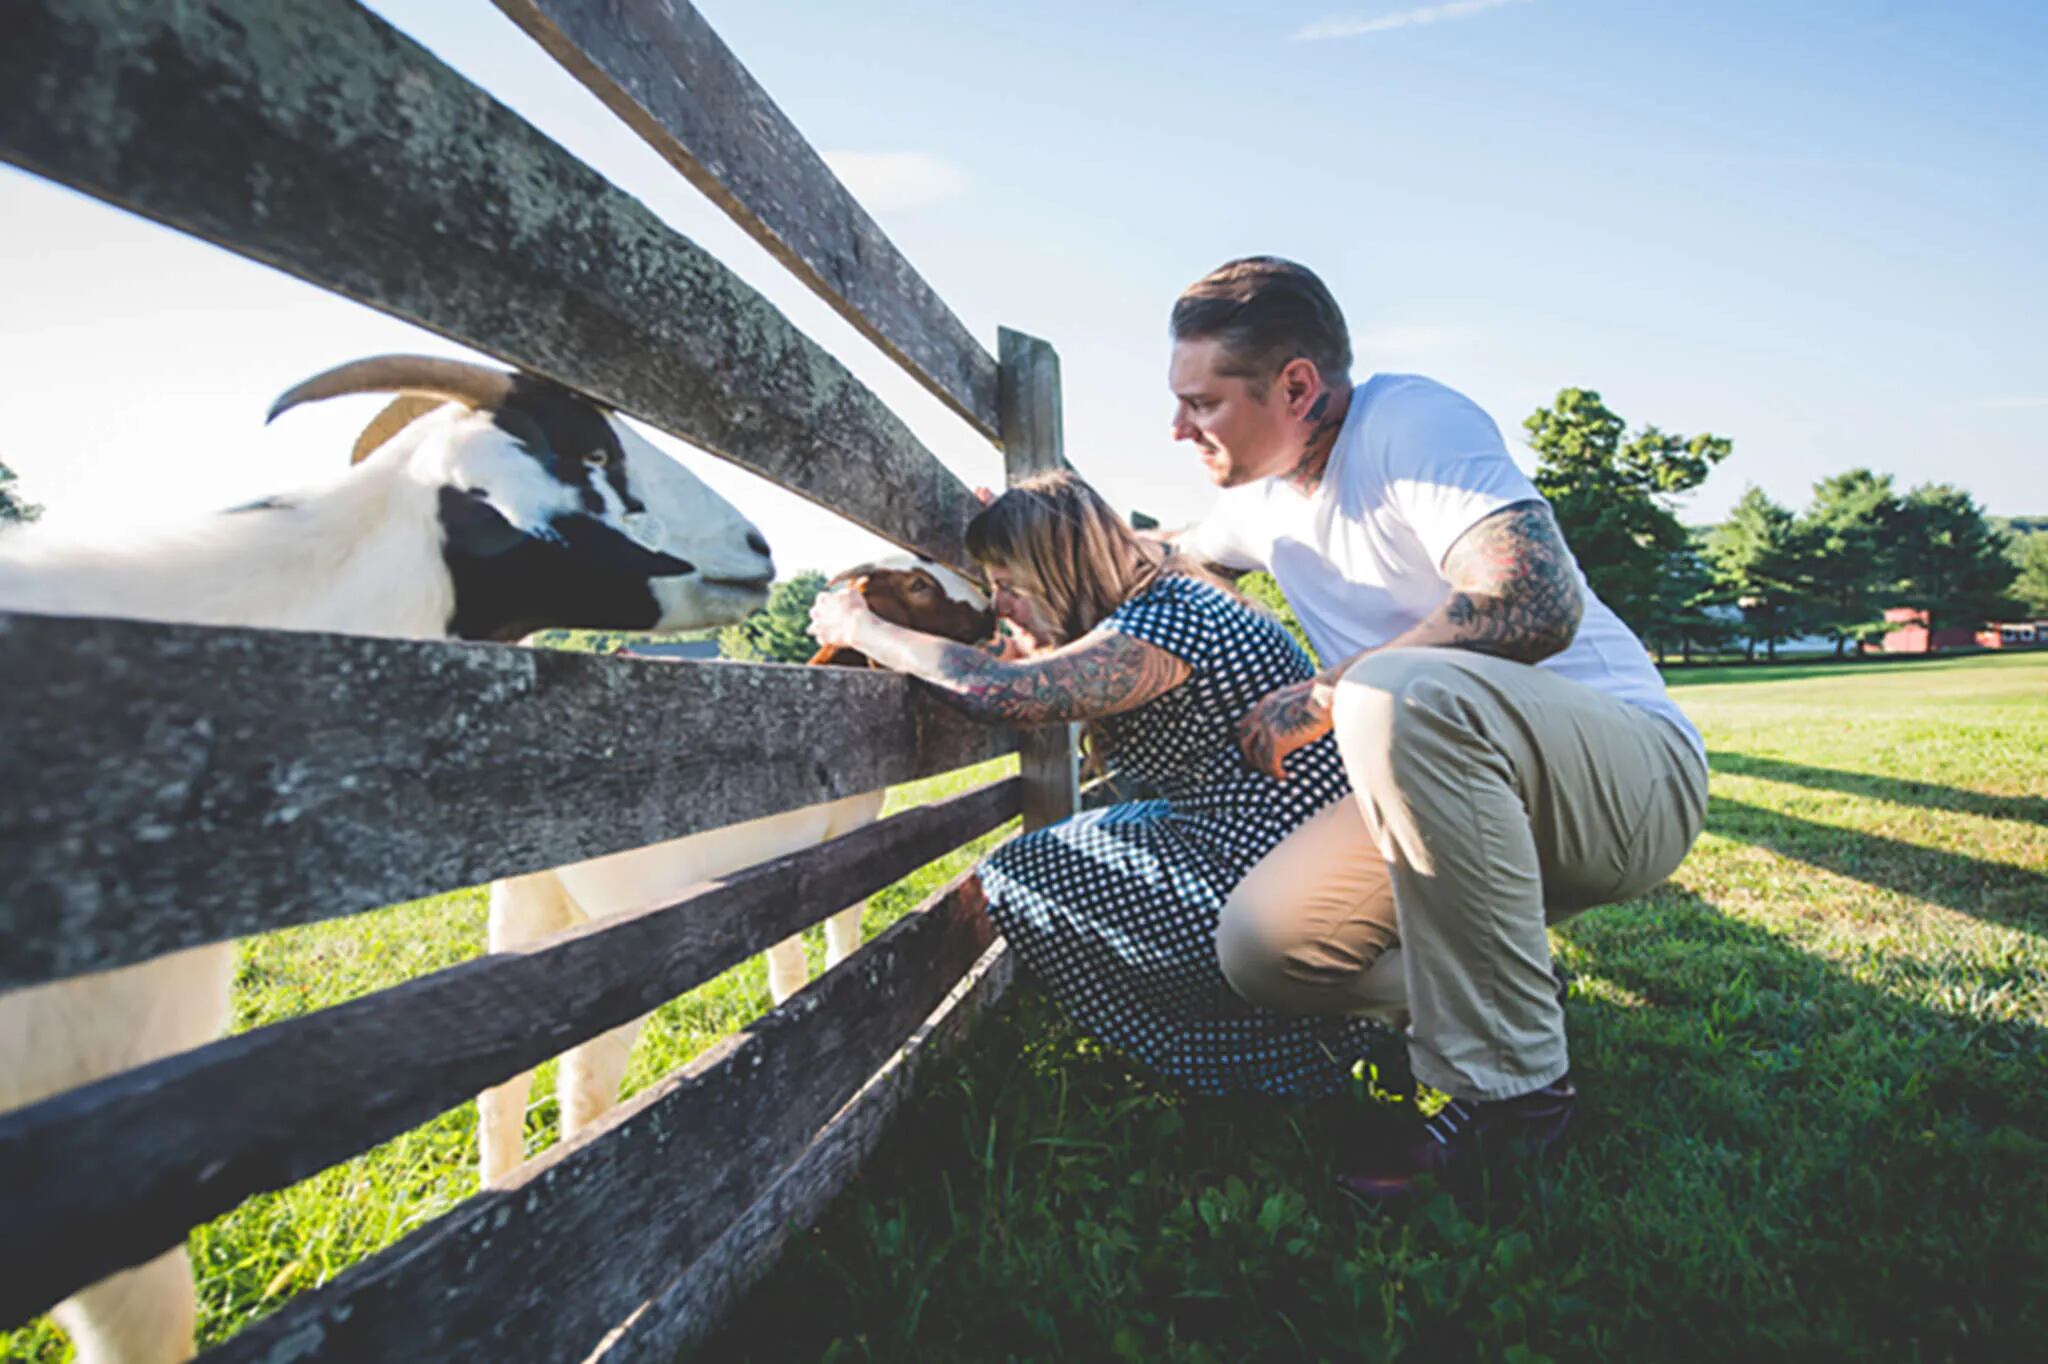 Engagement photos: Bring on the farm animals and props